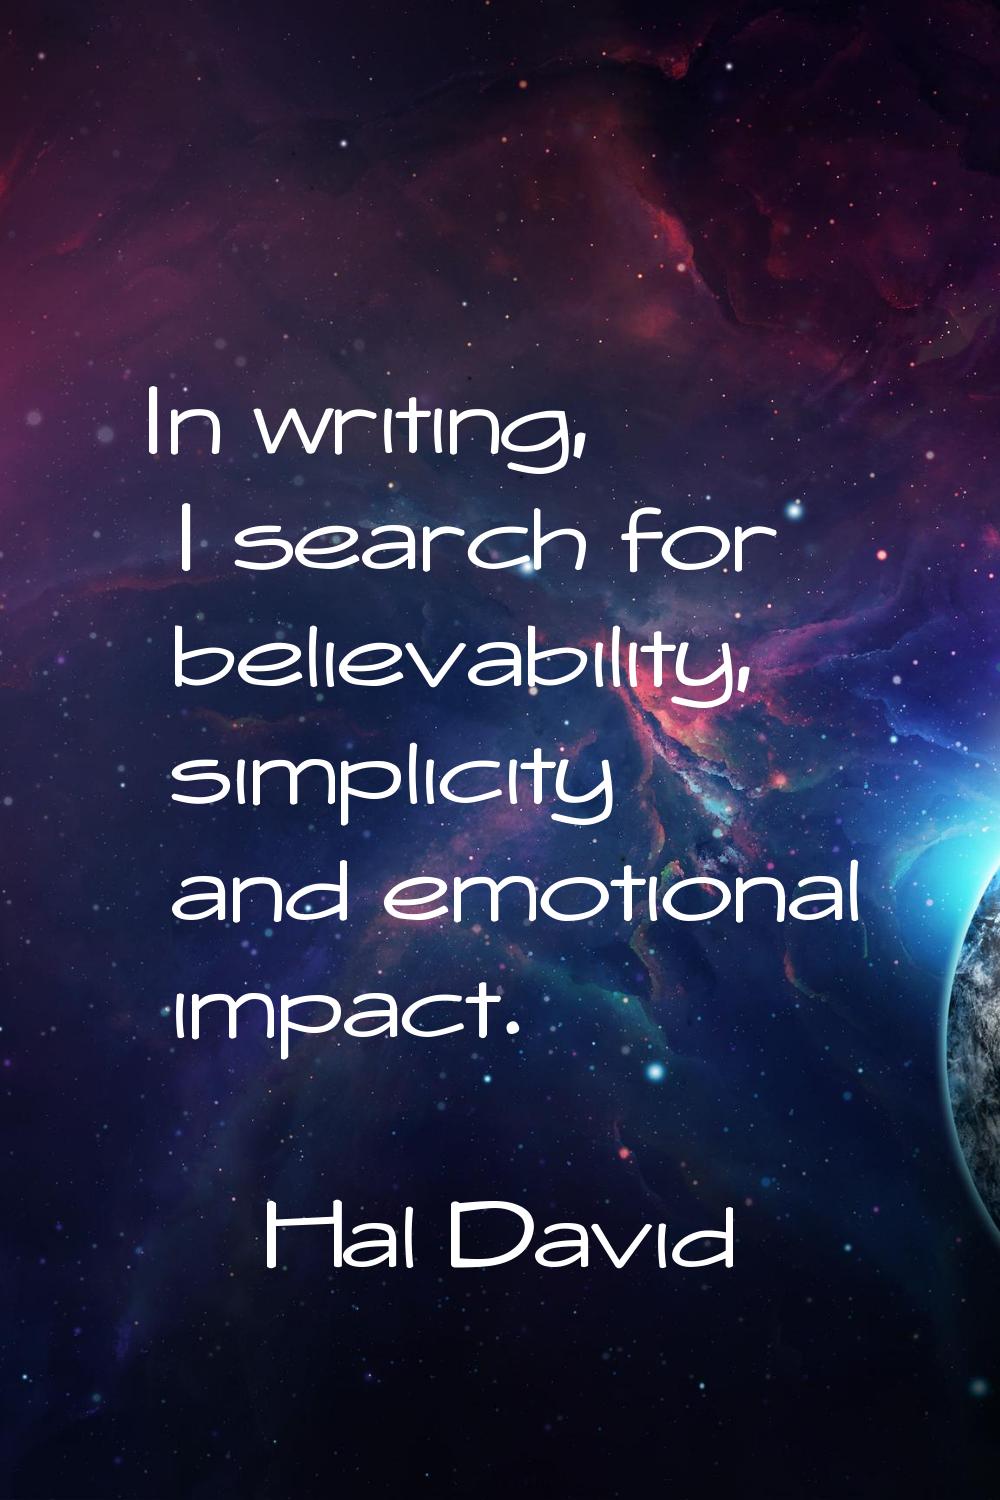 In writing, I search for believability, simplicity and emotional impact.